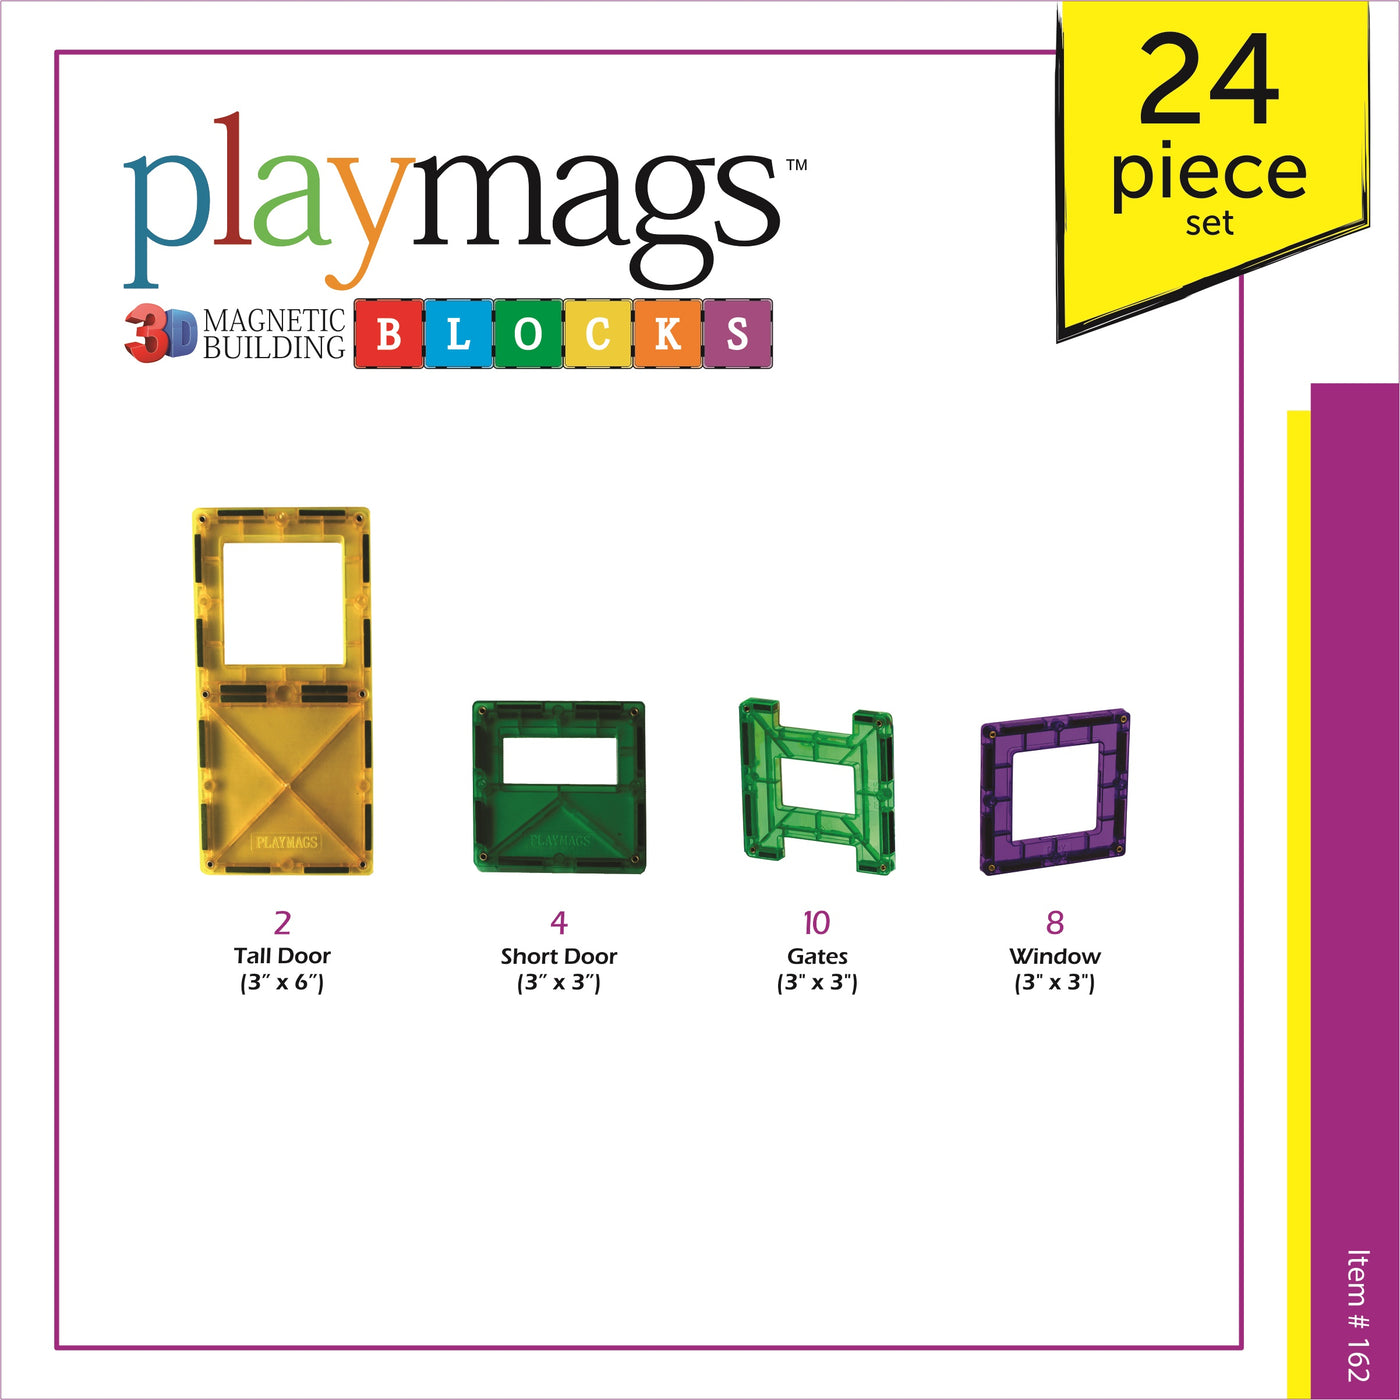 Playmags 24 stk accessory set